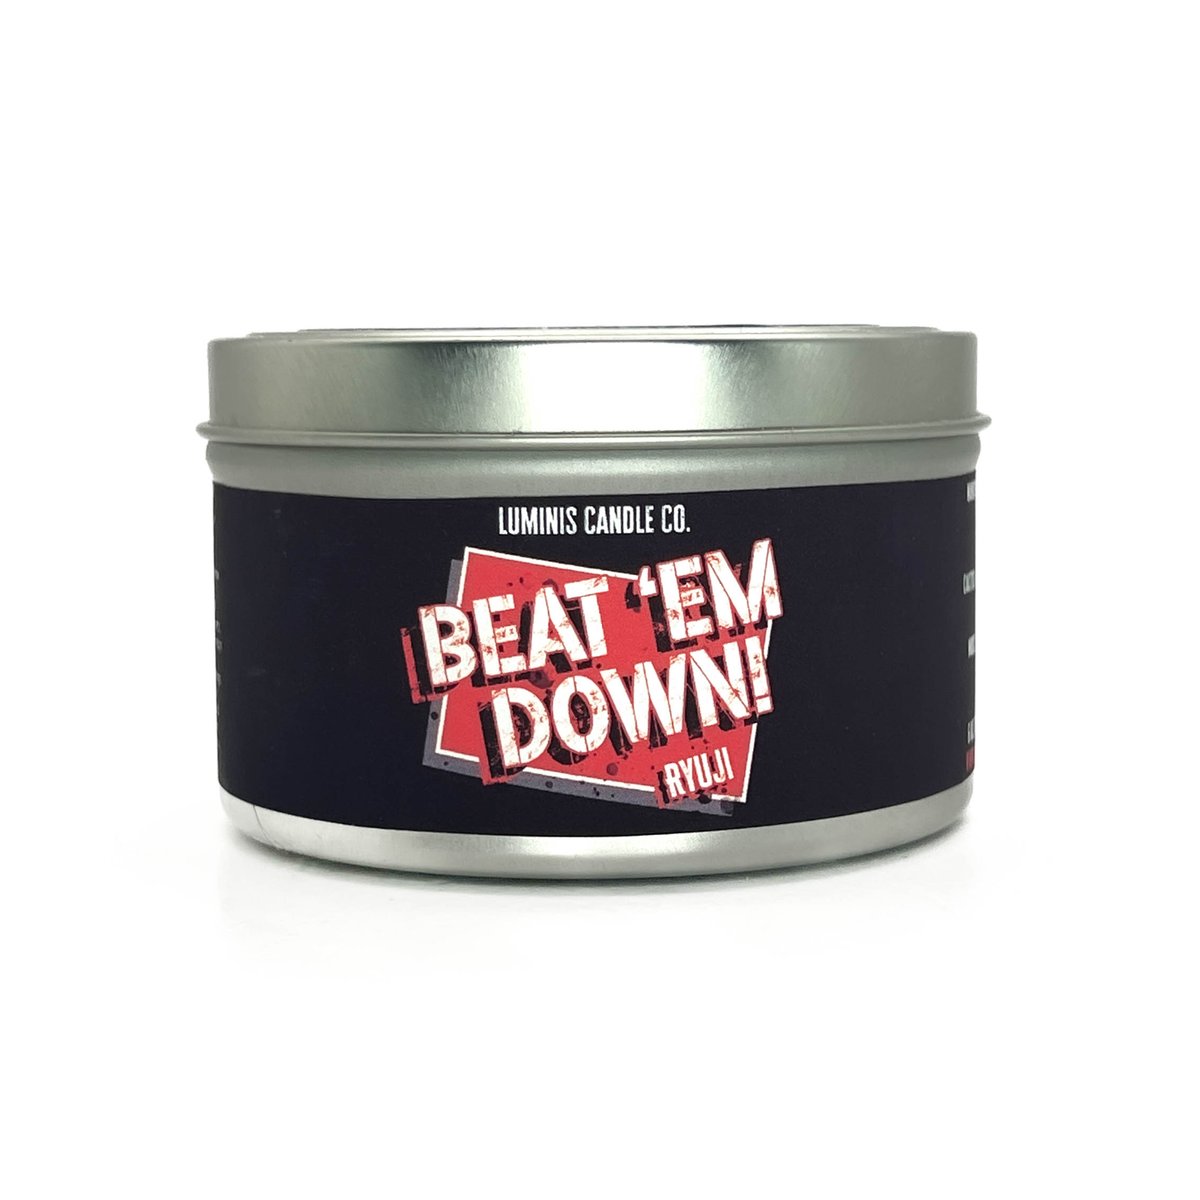 BEAT 'EM DOWN! - RYUJI
This upbeat, citrus-forward scent starts with zesty notes of mandarin, ozone, sea salt, and orange peel. Cactus accord follows, along with aloe, aldehydes, and rhubarb, all supported by patchouli, moss, sandalwood, musk, and vanilla.